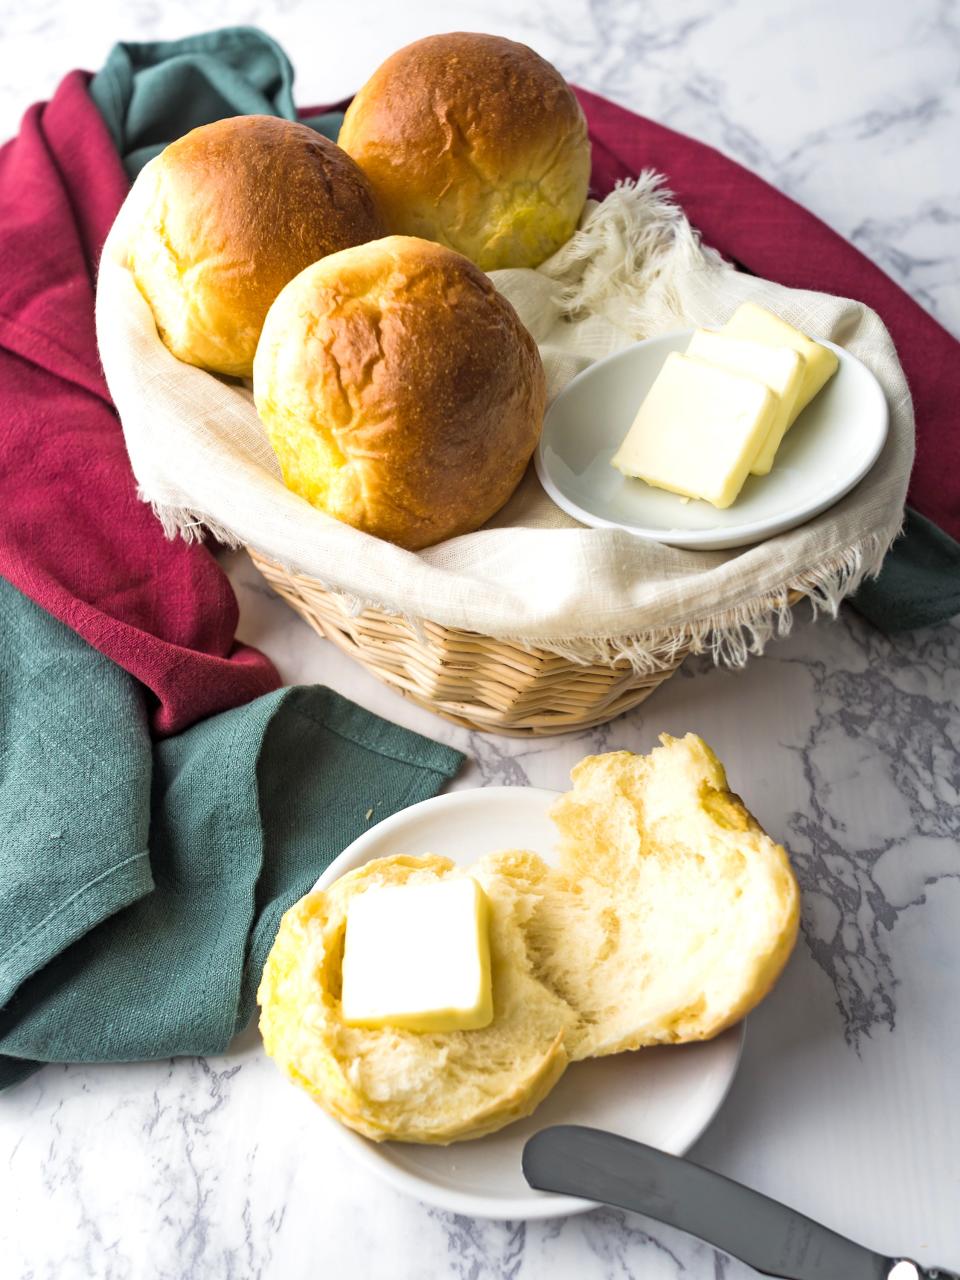 Prepare dinner rolls in advance and then freeze. Bring them out to brown and serve ahead of your meal.